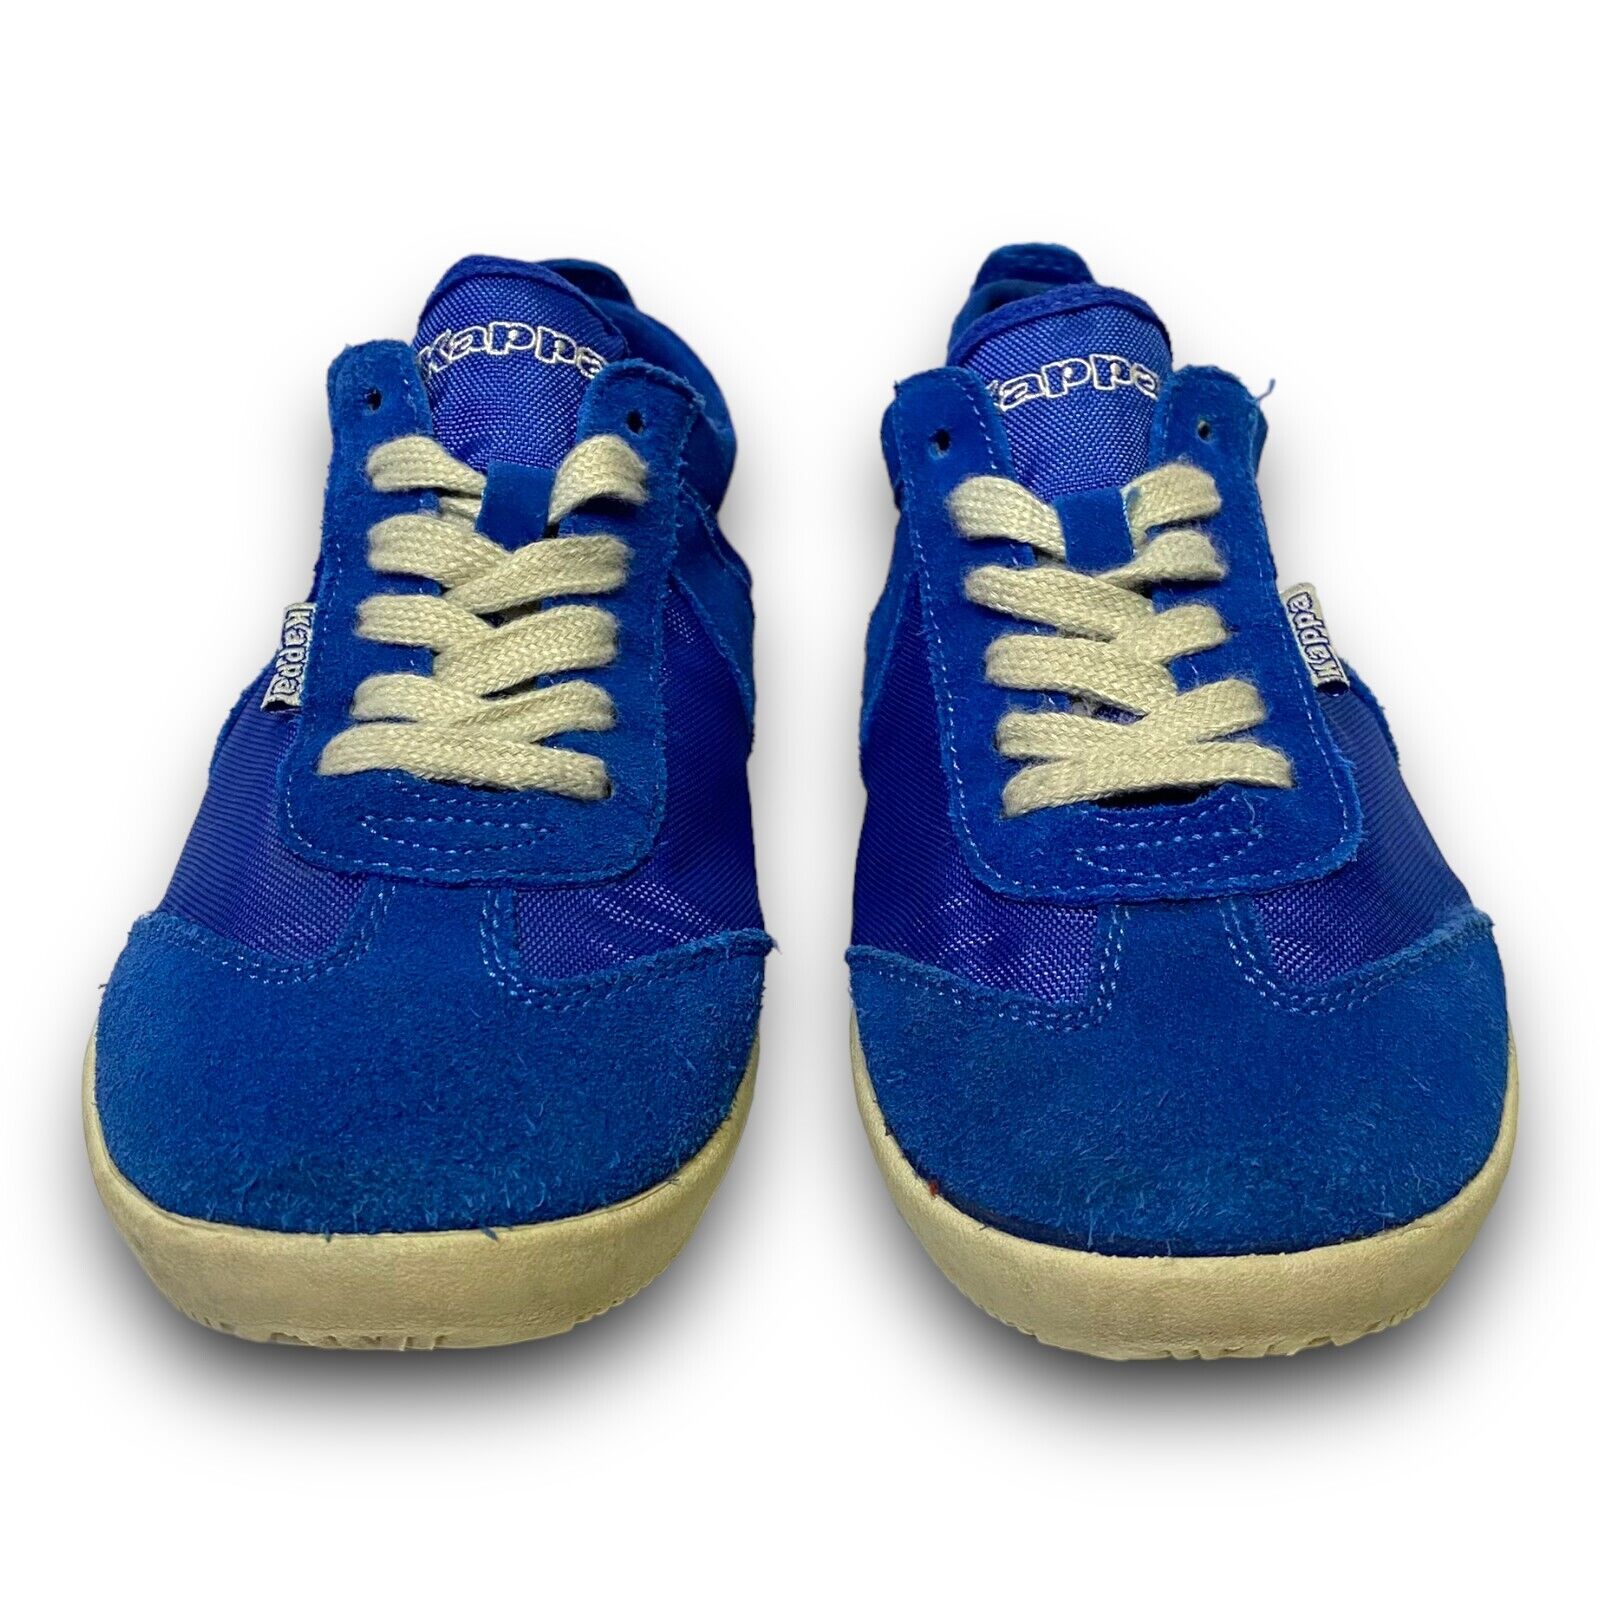 Kappa Mens Vintage 90s Rare Blue 7 Logo Lace Shoes Sneakers | Up Size eBay US Suede